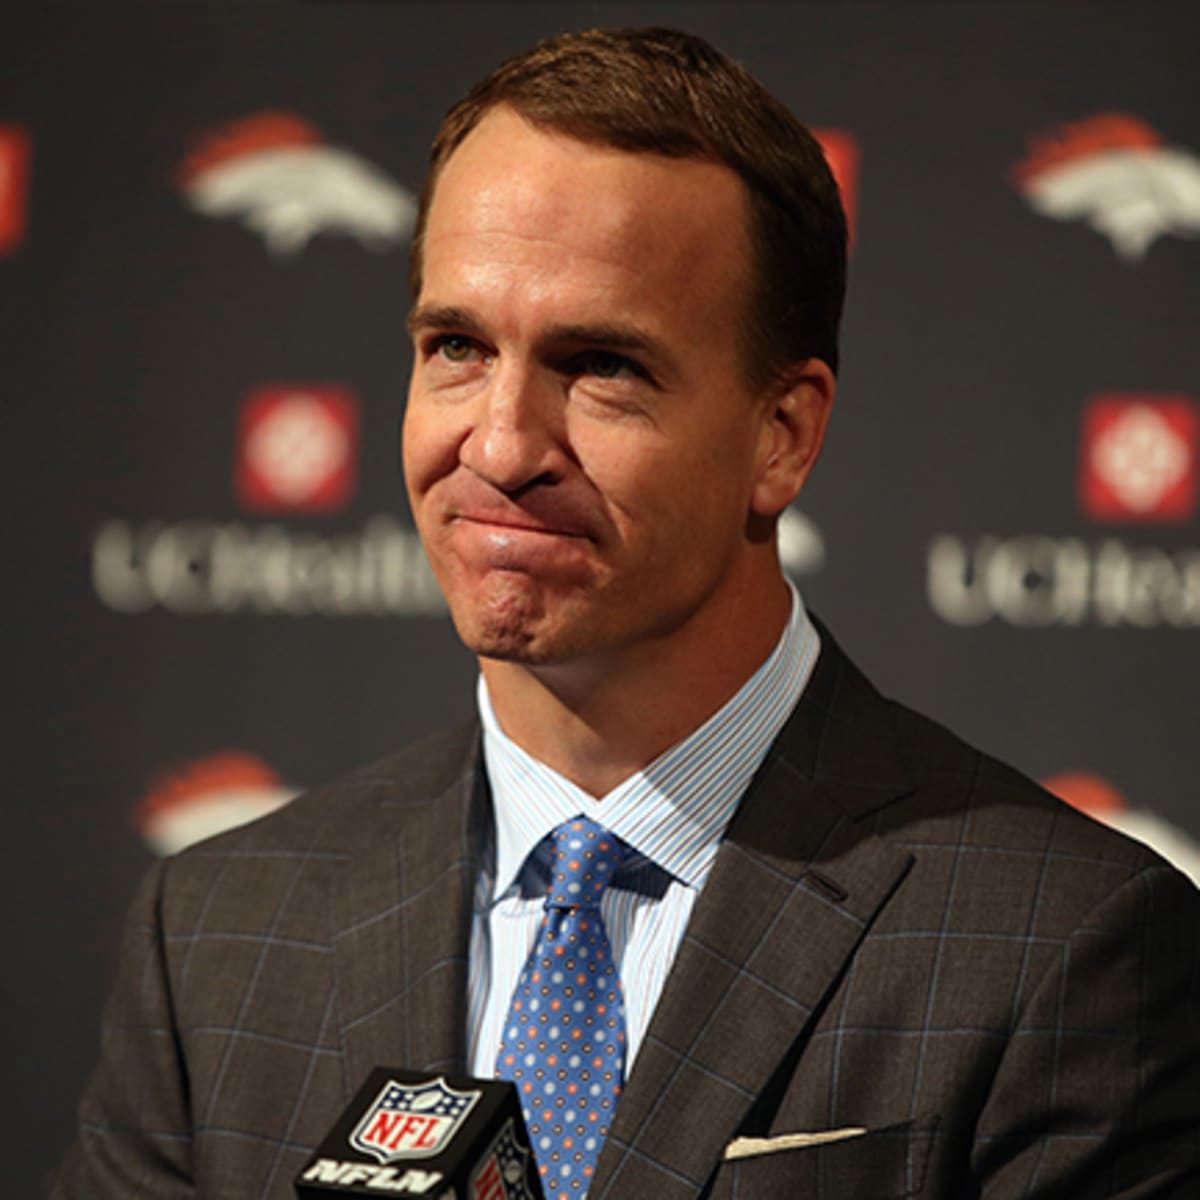 NFL: Peyton Manning named best player to ever wear No. 18